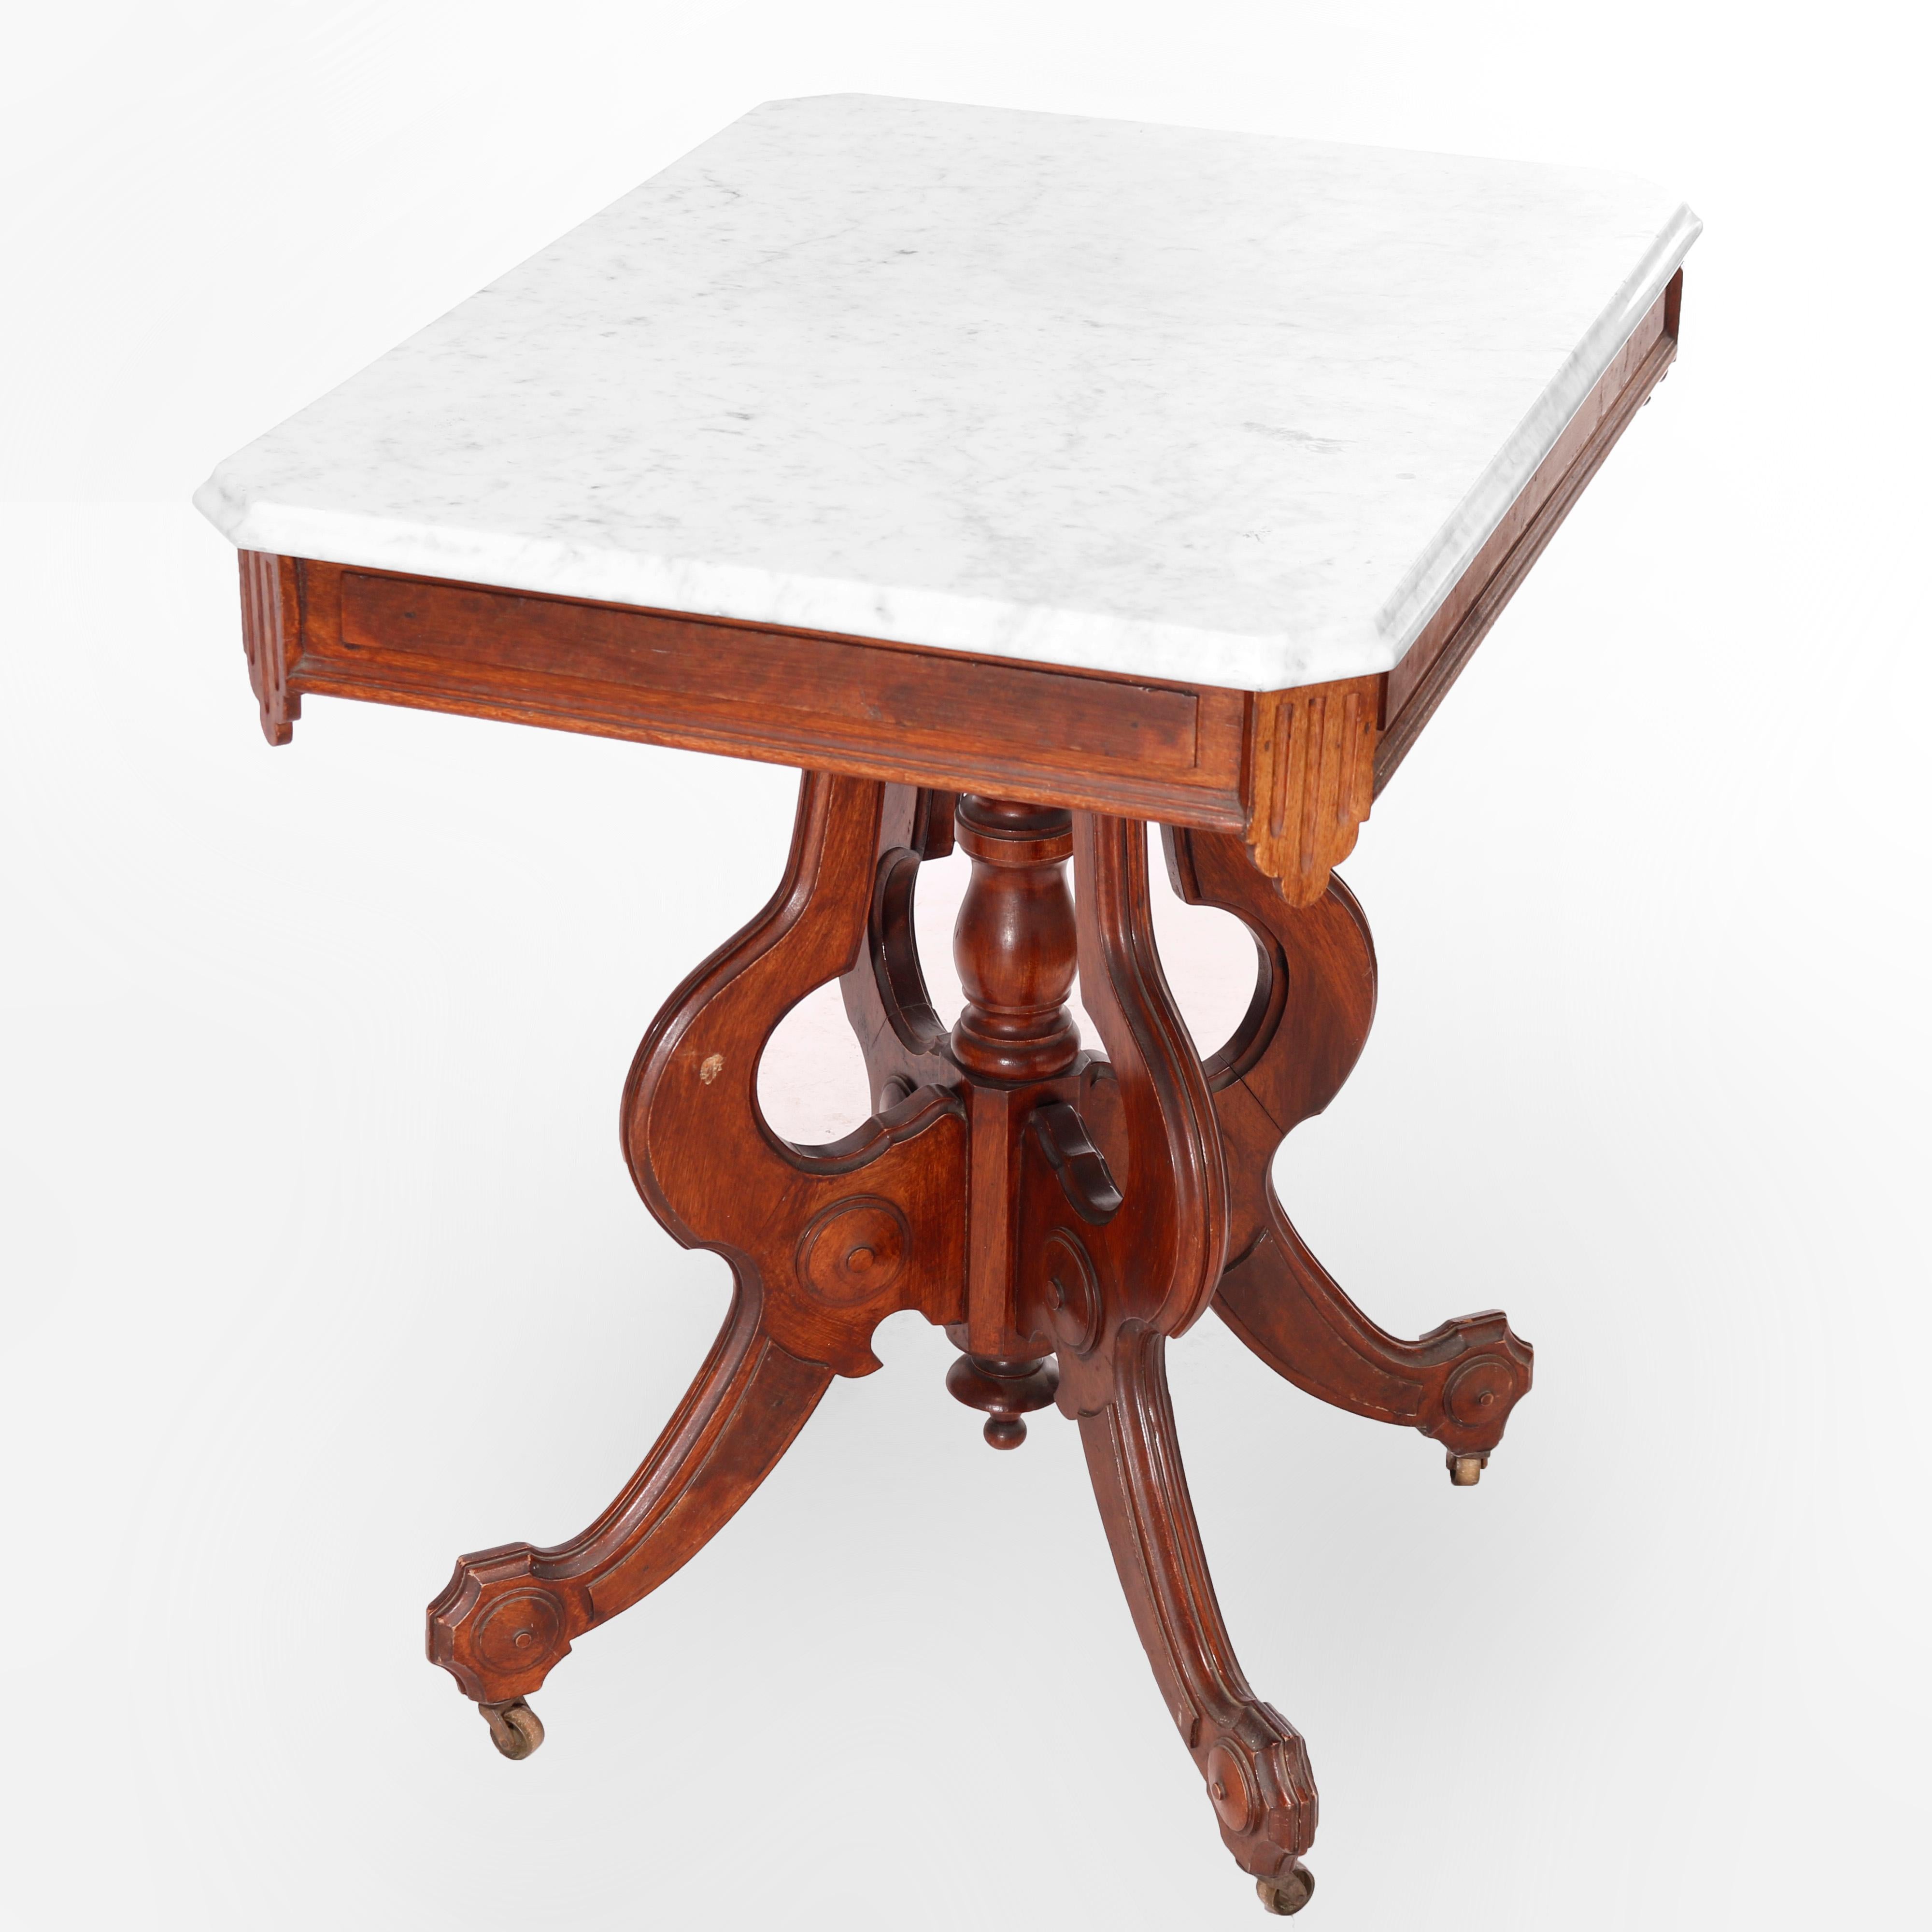 Antique Eastlake Walnut & Burl Marble Top Parlor Table circa 1890 In Good Condition For Sale In Big Flats, NY